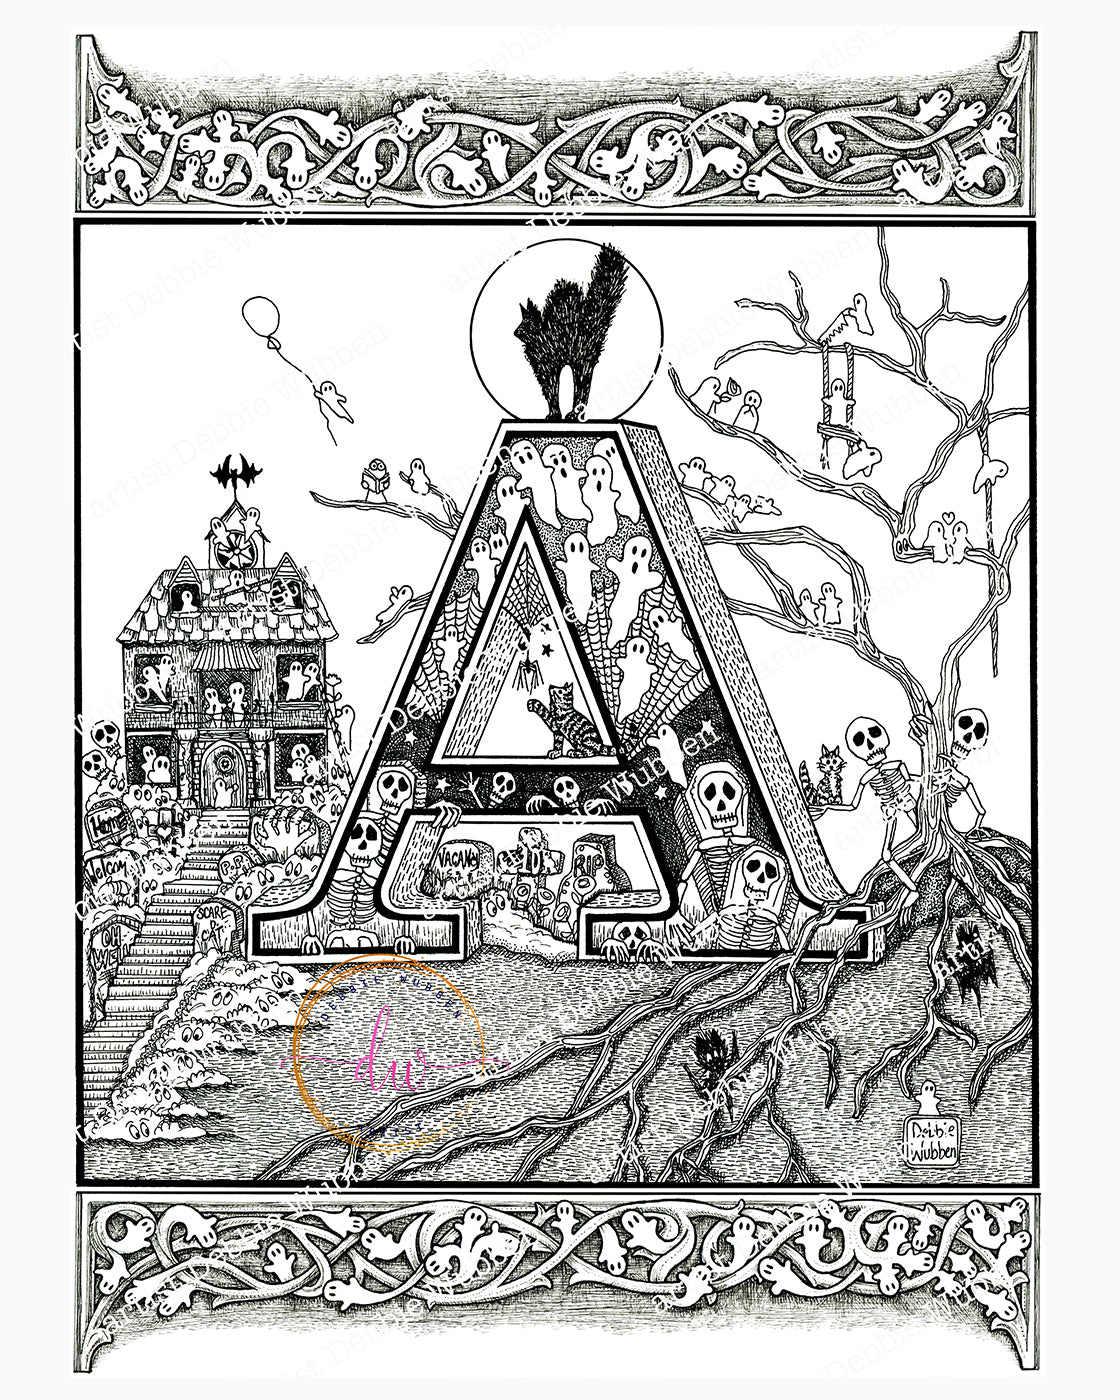 A Haunted Alphabet - Letter "A"